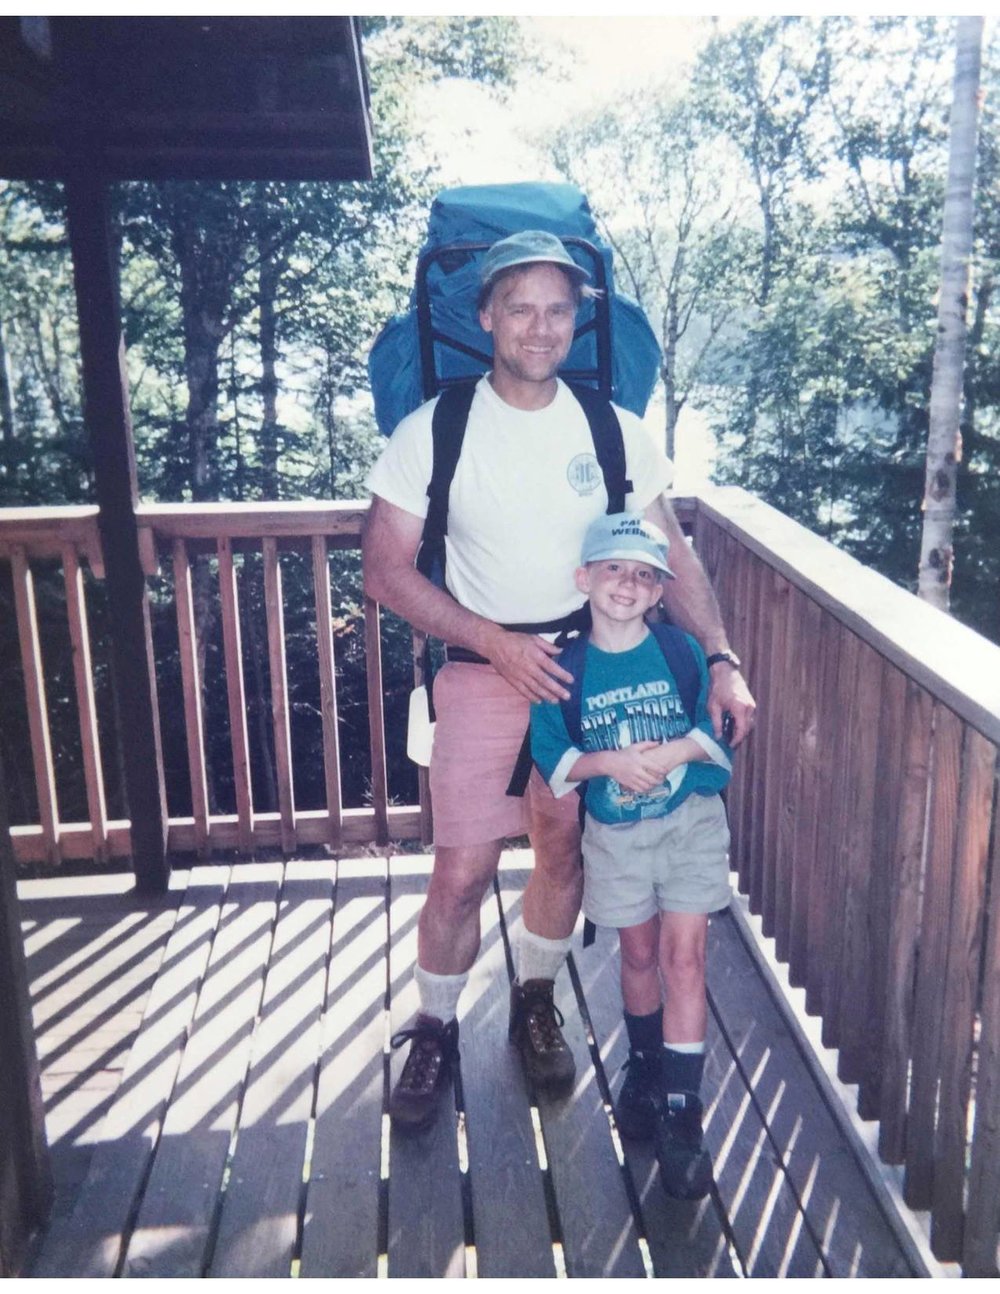 Hiking in the Appalachian Mountains with Dad, me rocking a vintage Sea Dogs T-Shirt that's easily 6 sizes too large with far too short shorts.